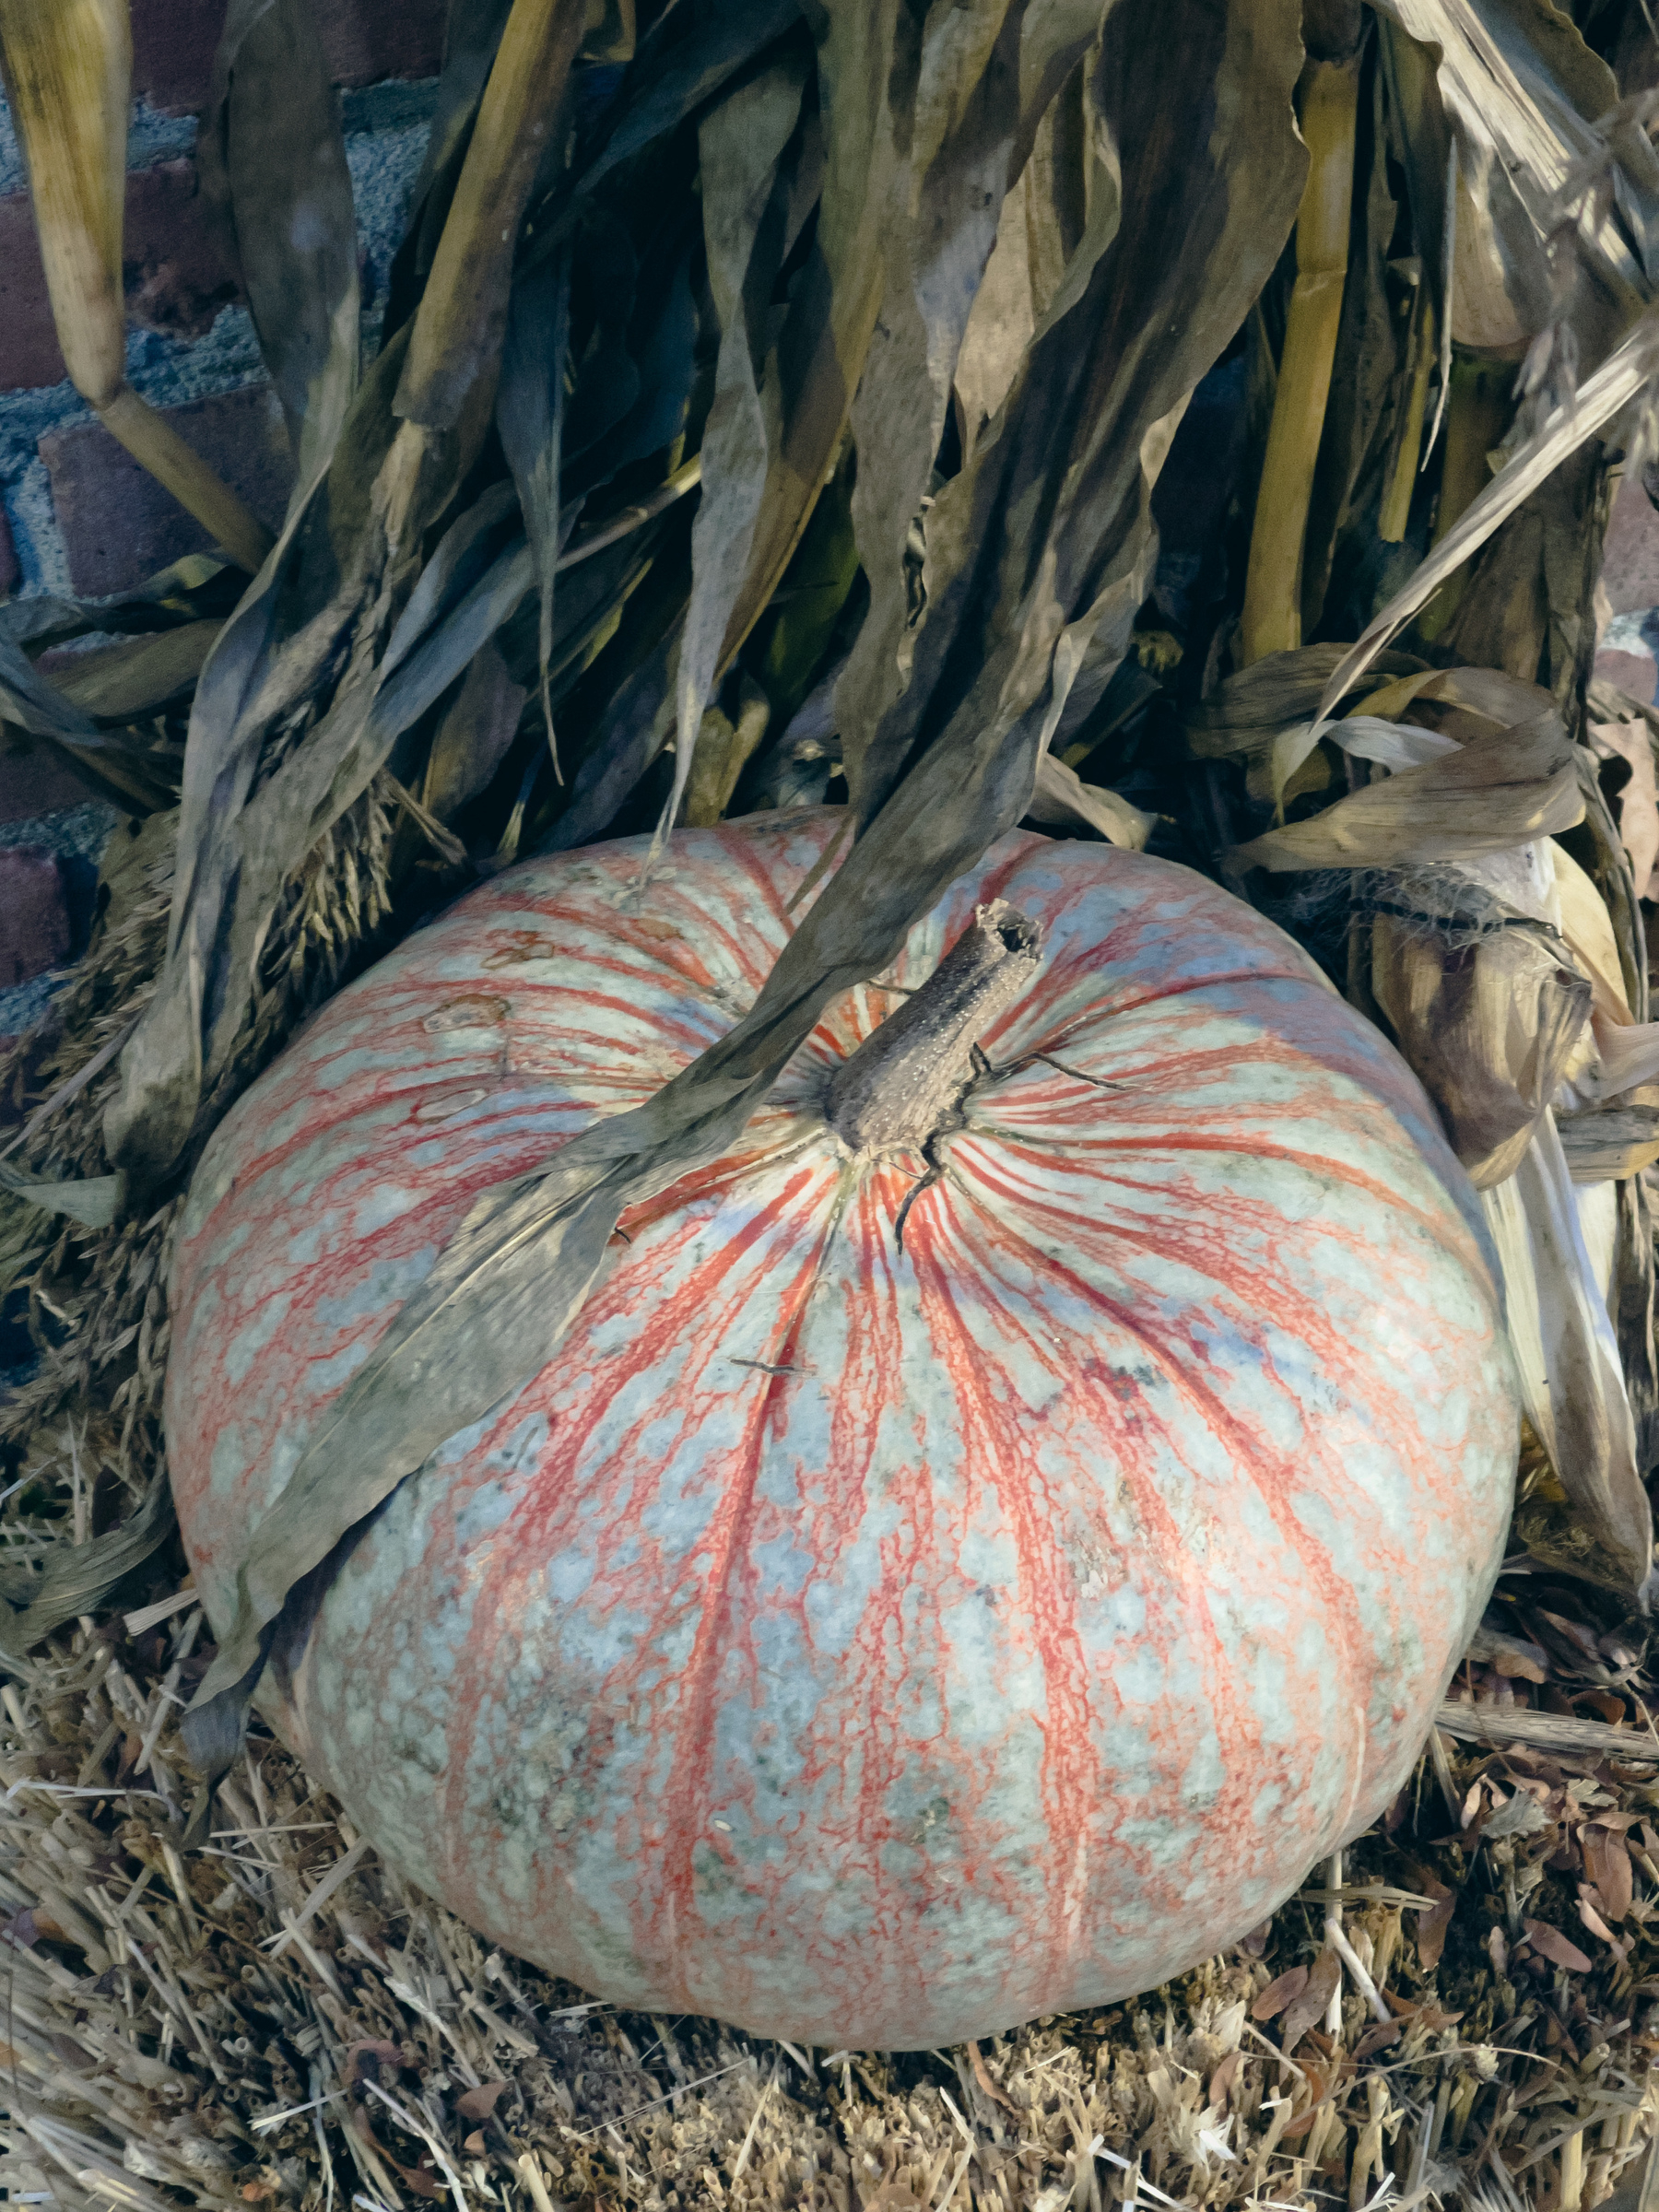 Closeup of pumpkin decoration sitting on straw with the bottoms of cornstalks behind it.